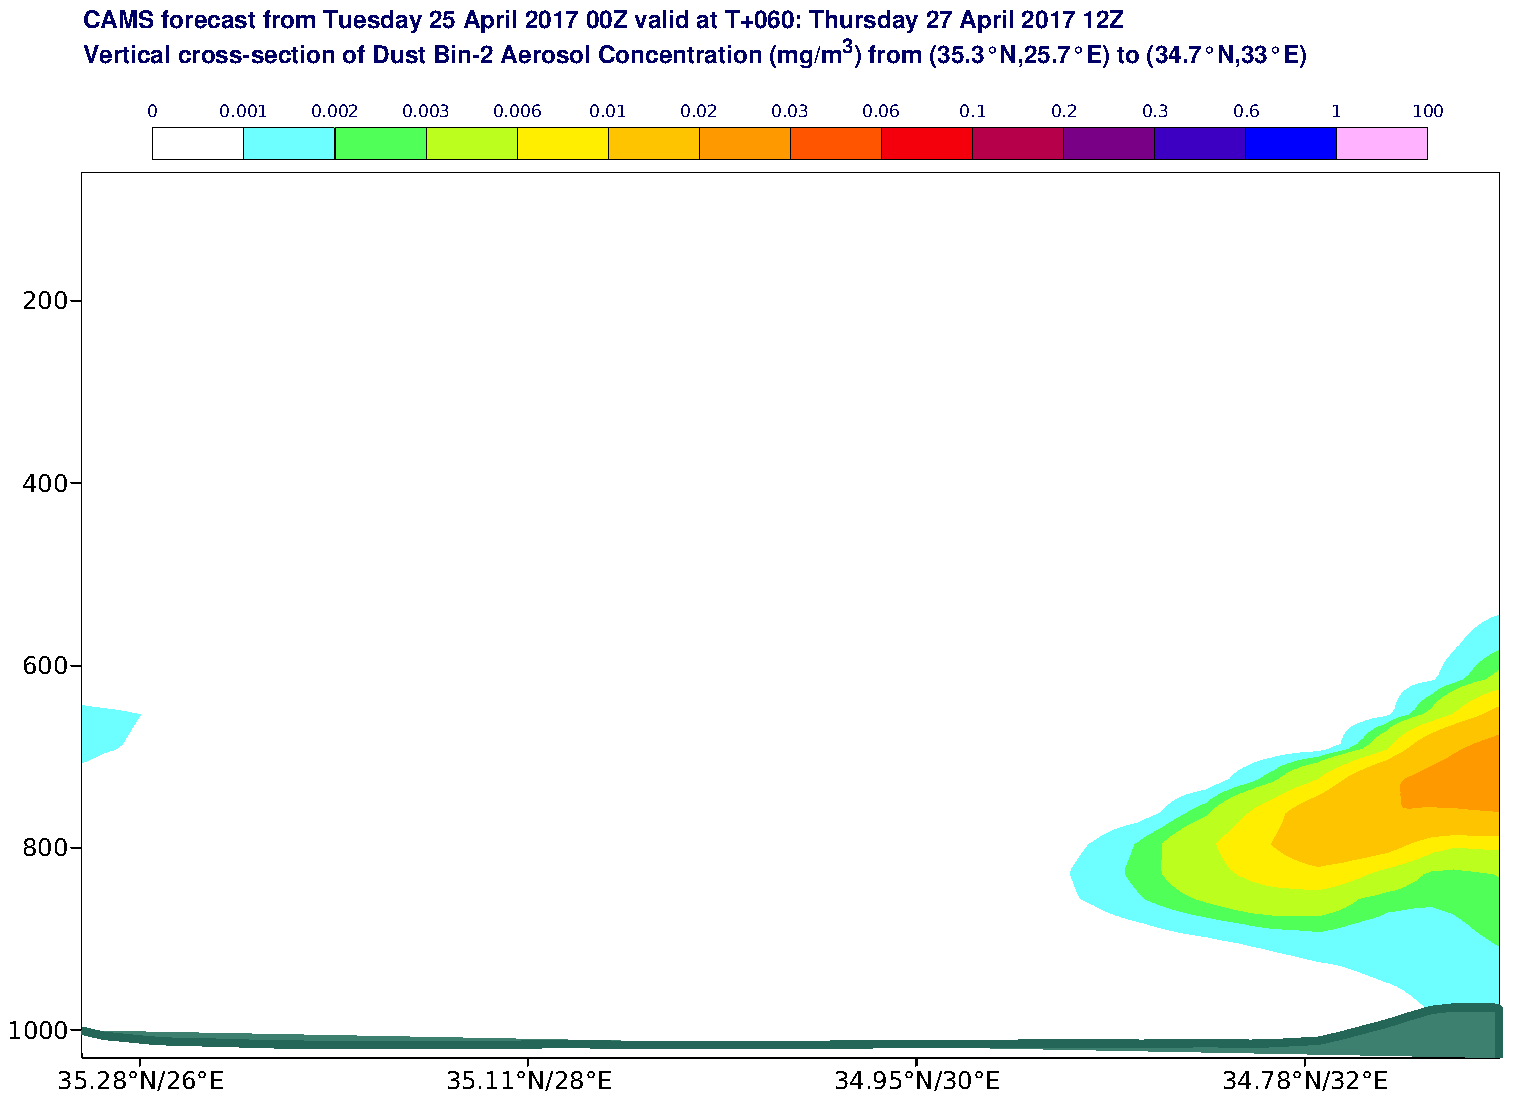 Vertical cross-section of Dust Bin-2 Aerosol Concentration (mg/m3) valid at T60 - 2017-04-27 12:00